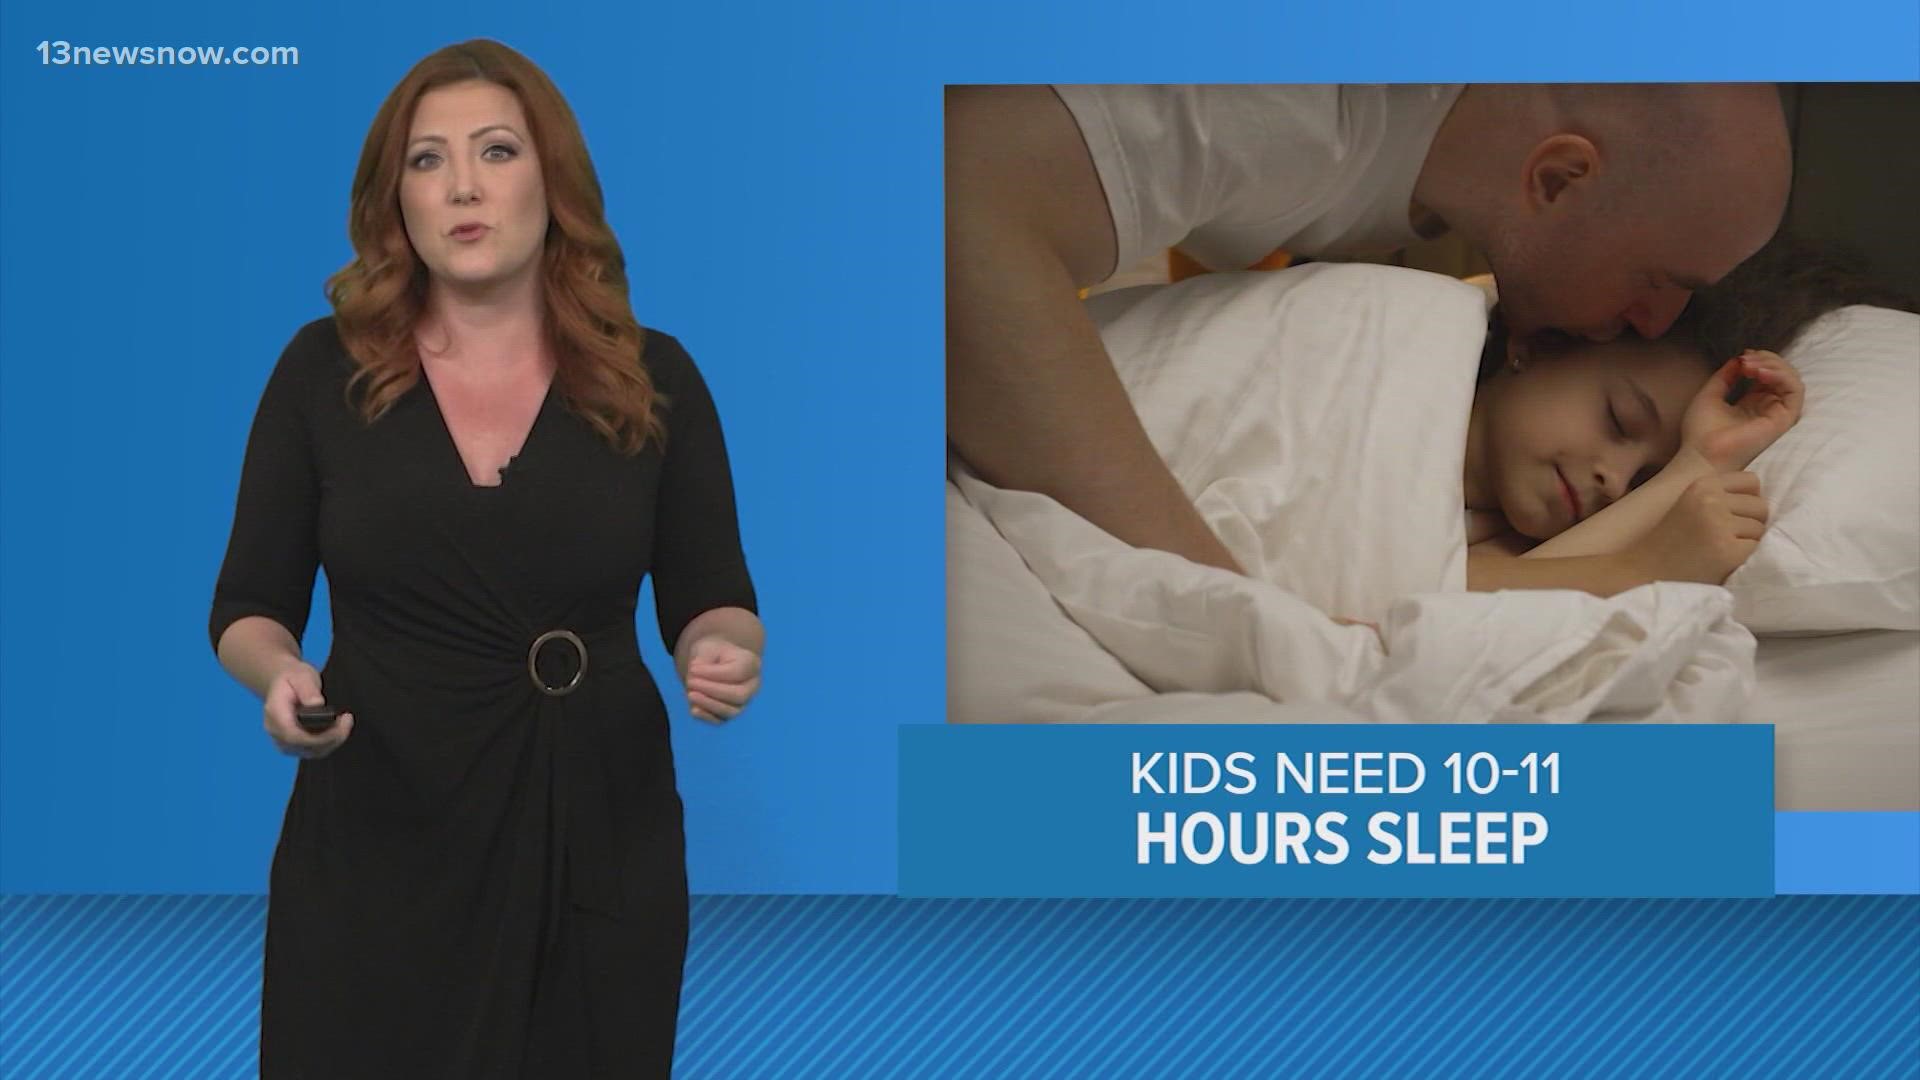 Before the first day of school, your children's sleep schedule will need to catch up. Here’s some advice on what you can do.